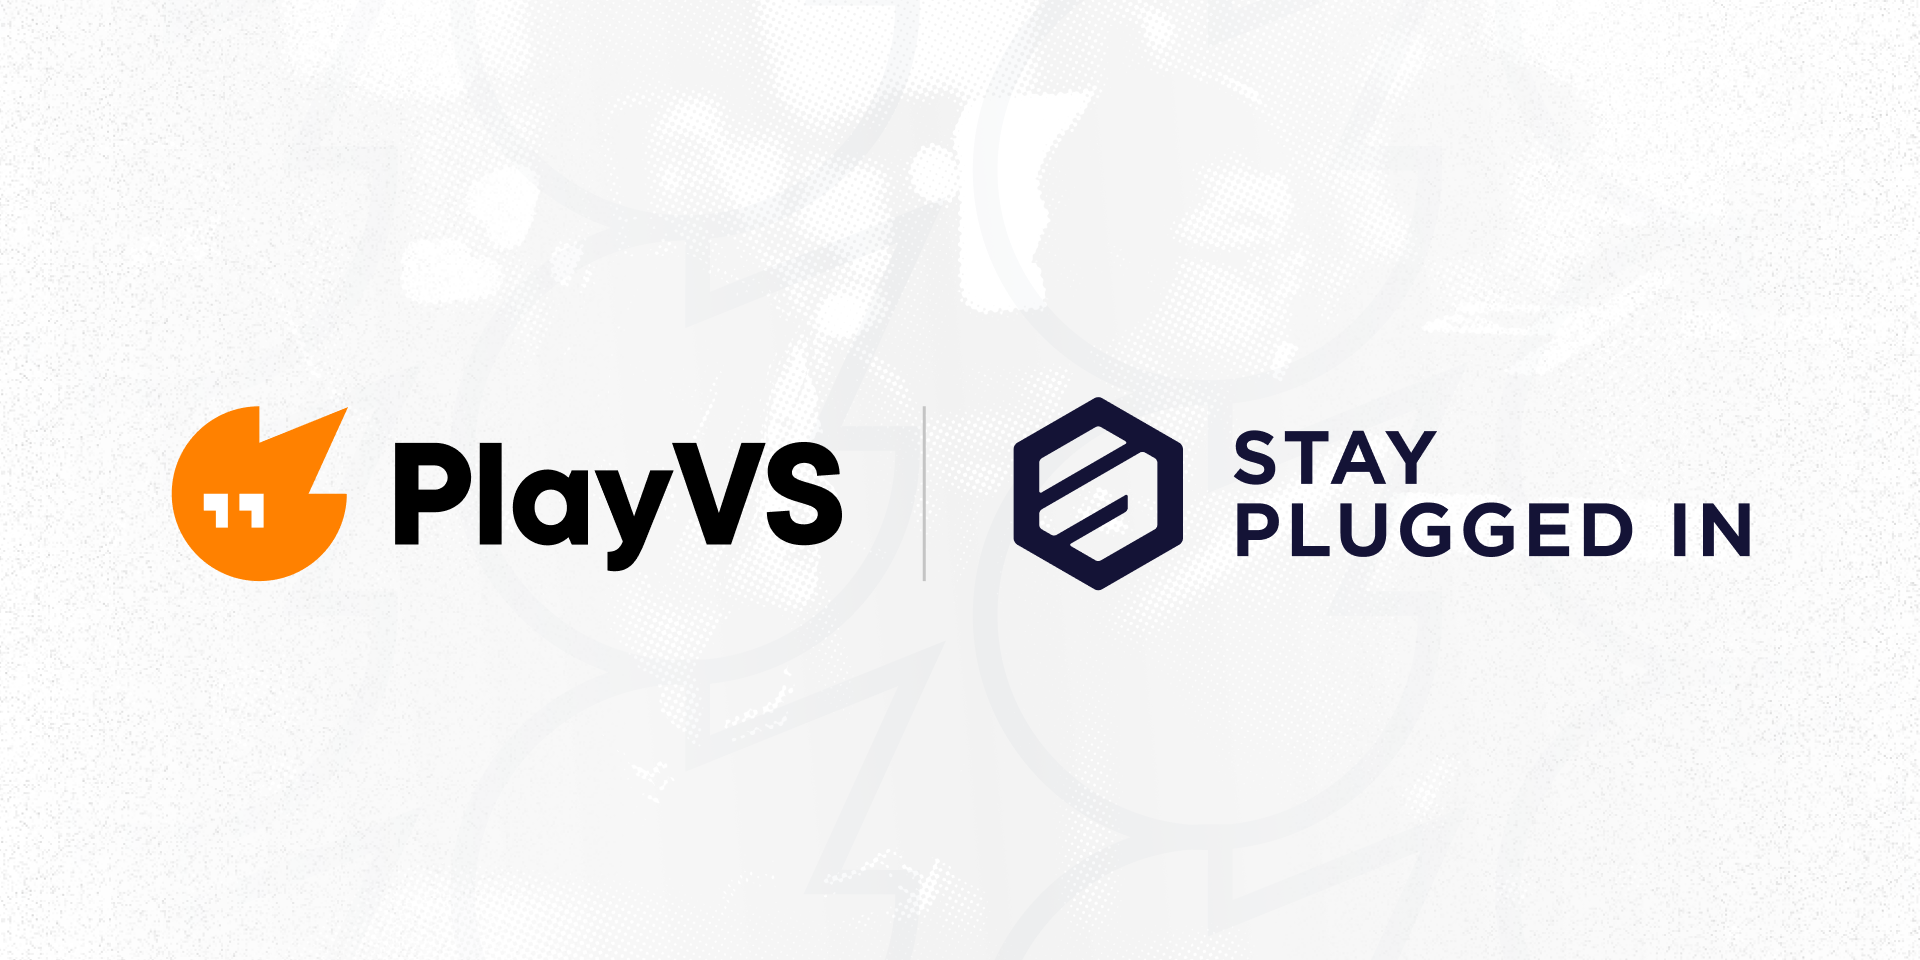 PLAYVS AND STAY PLUGGED IN PARTNER